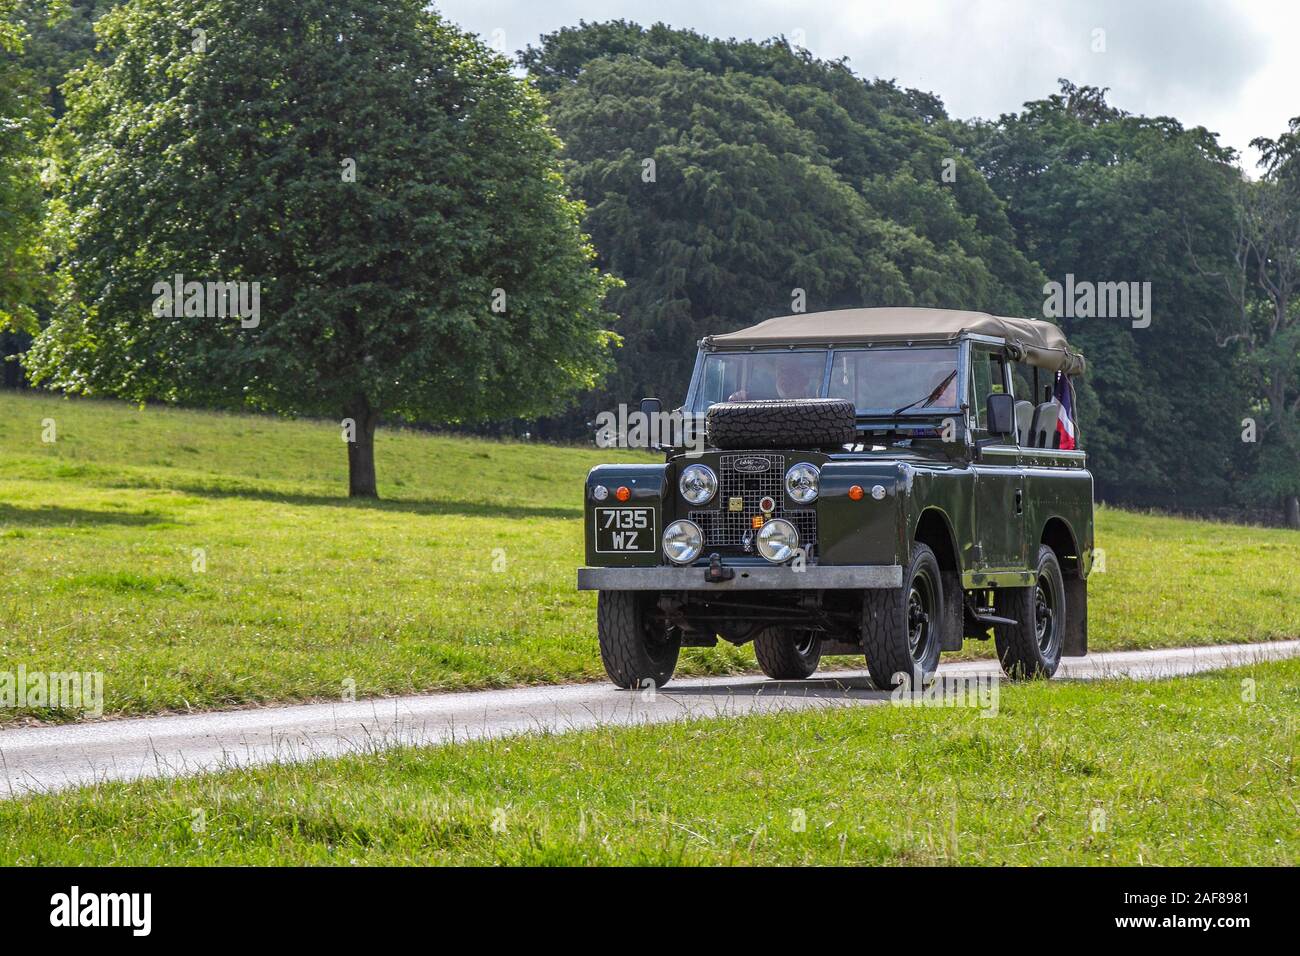 1969 60s sixties Series IIA green Land Rover; Classic cars, historic, cherished, old timers, collectable restored vintage veteran, heritage vehicles of yesteryear arriving for the Mark Woodward historical motoring event at Leighton Hall, Carnforth, UK Stock Photo